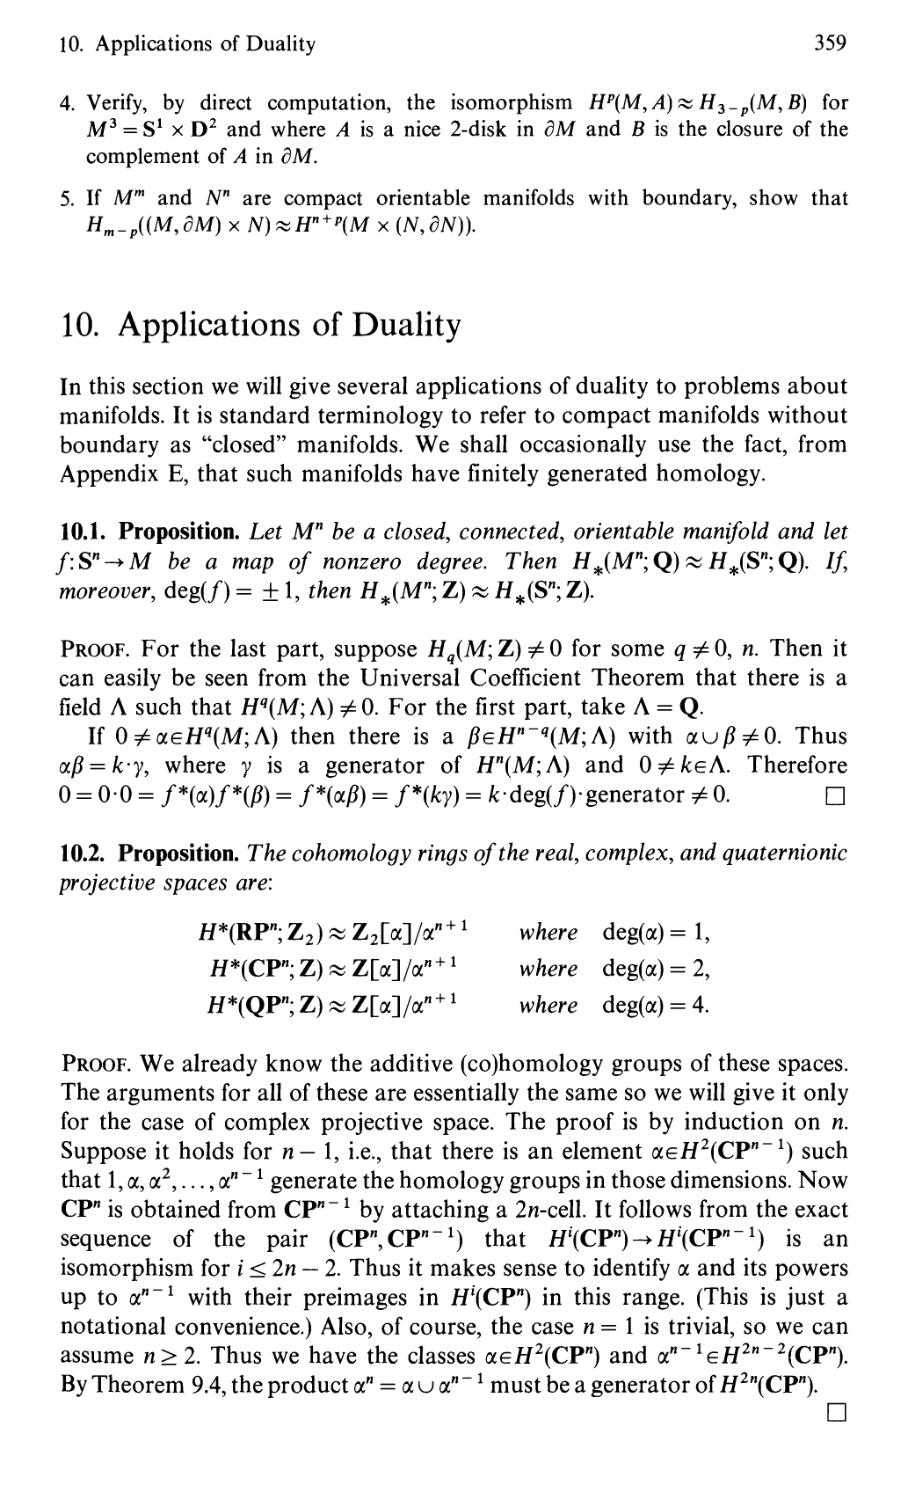 10. Applications of Duality